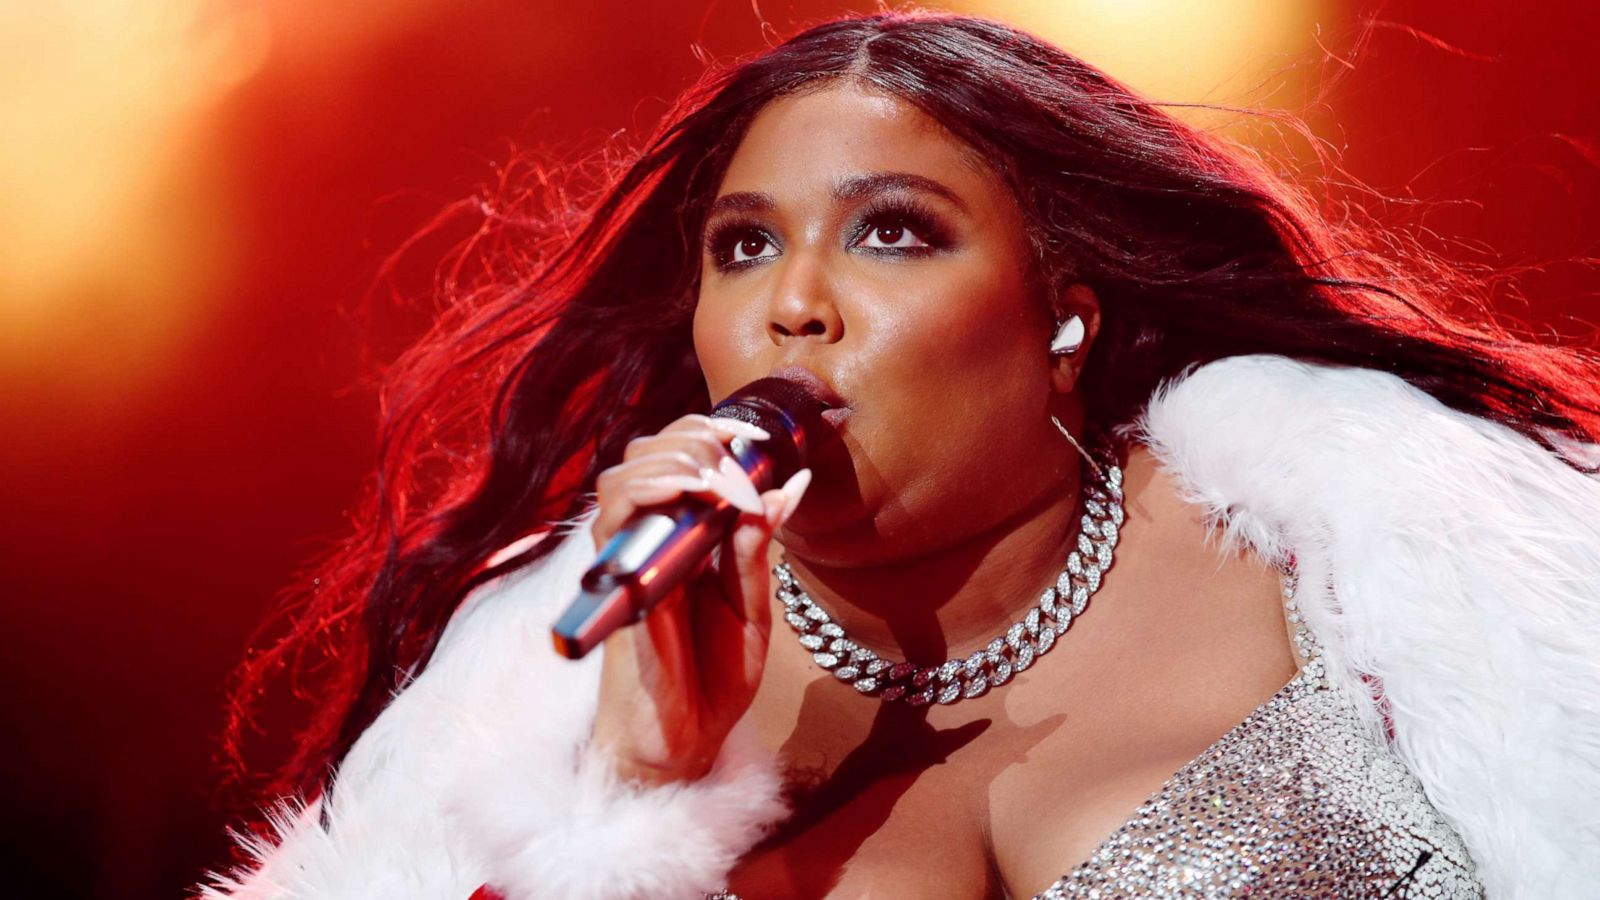 Lizzo has revealed how Grammy-winning rapper Queen Latifah became a major  inspiration and influence on her music career during her childhood years.